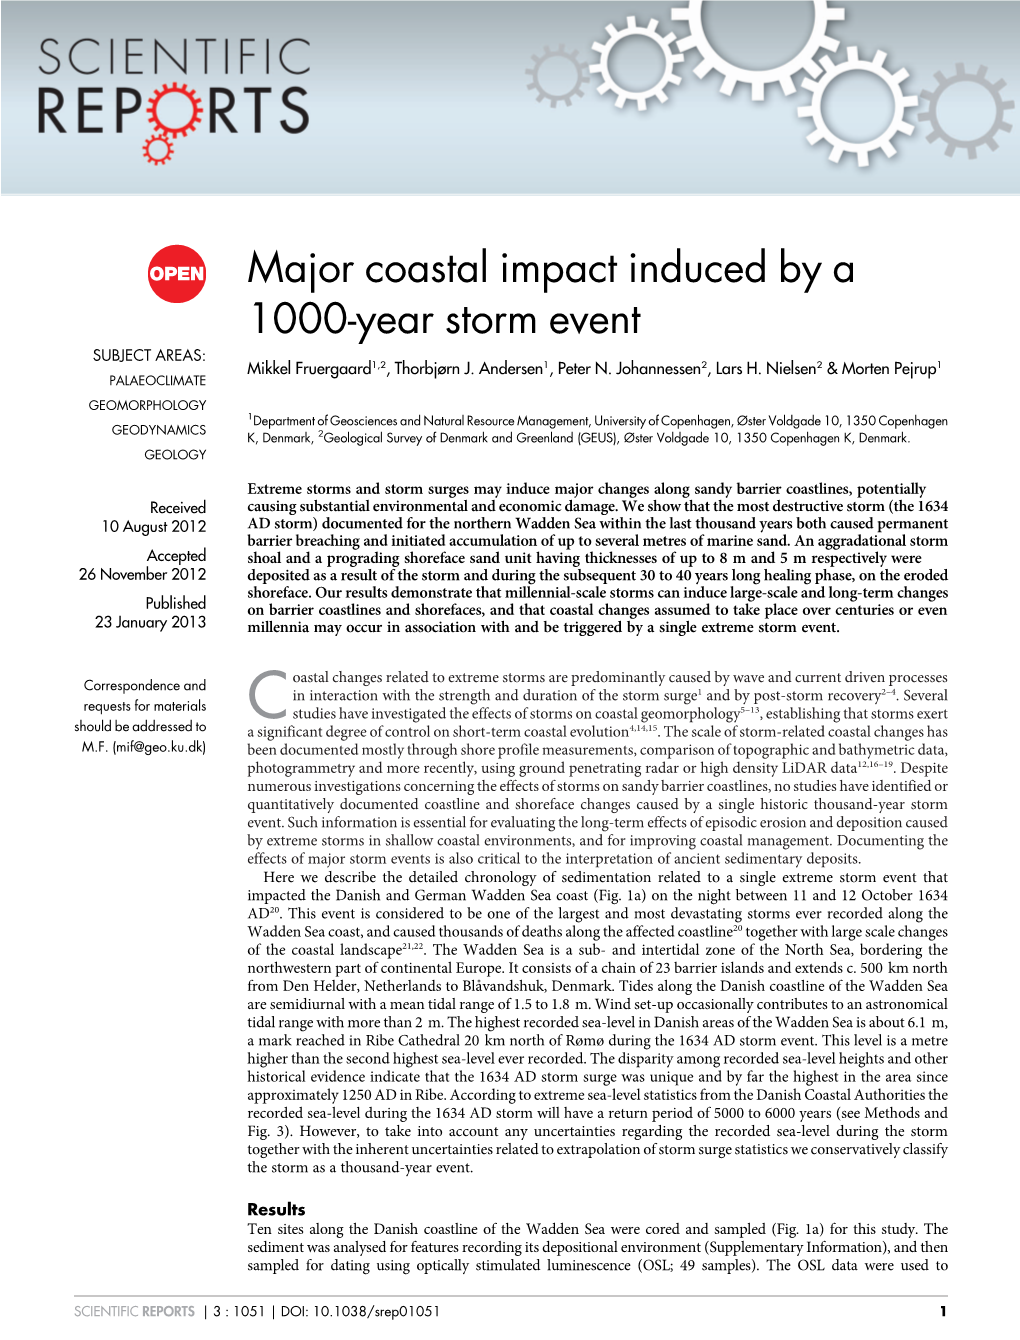 Major Coastal Impact Induced by a 1000-Year Storm Event SUBJECT AREAS: Mikkel Fruergaard1,2, Thorbjørn J